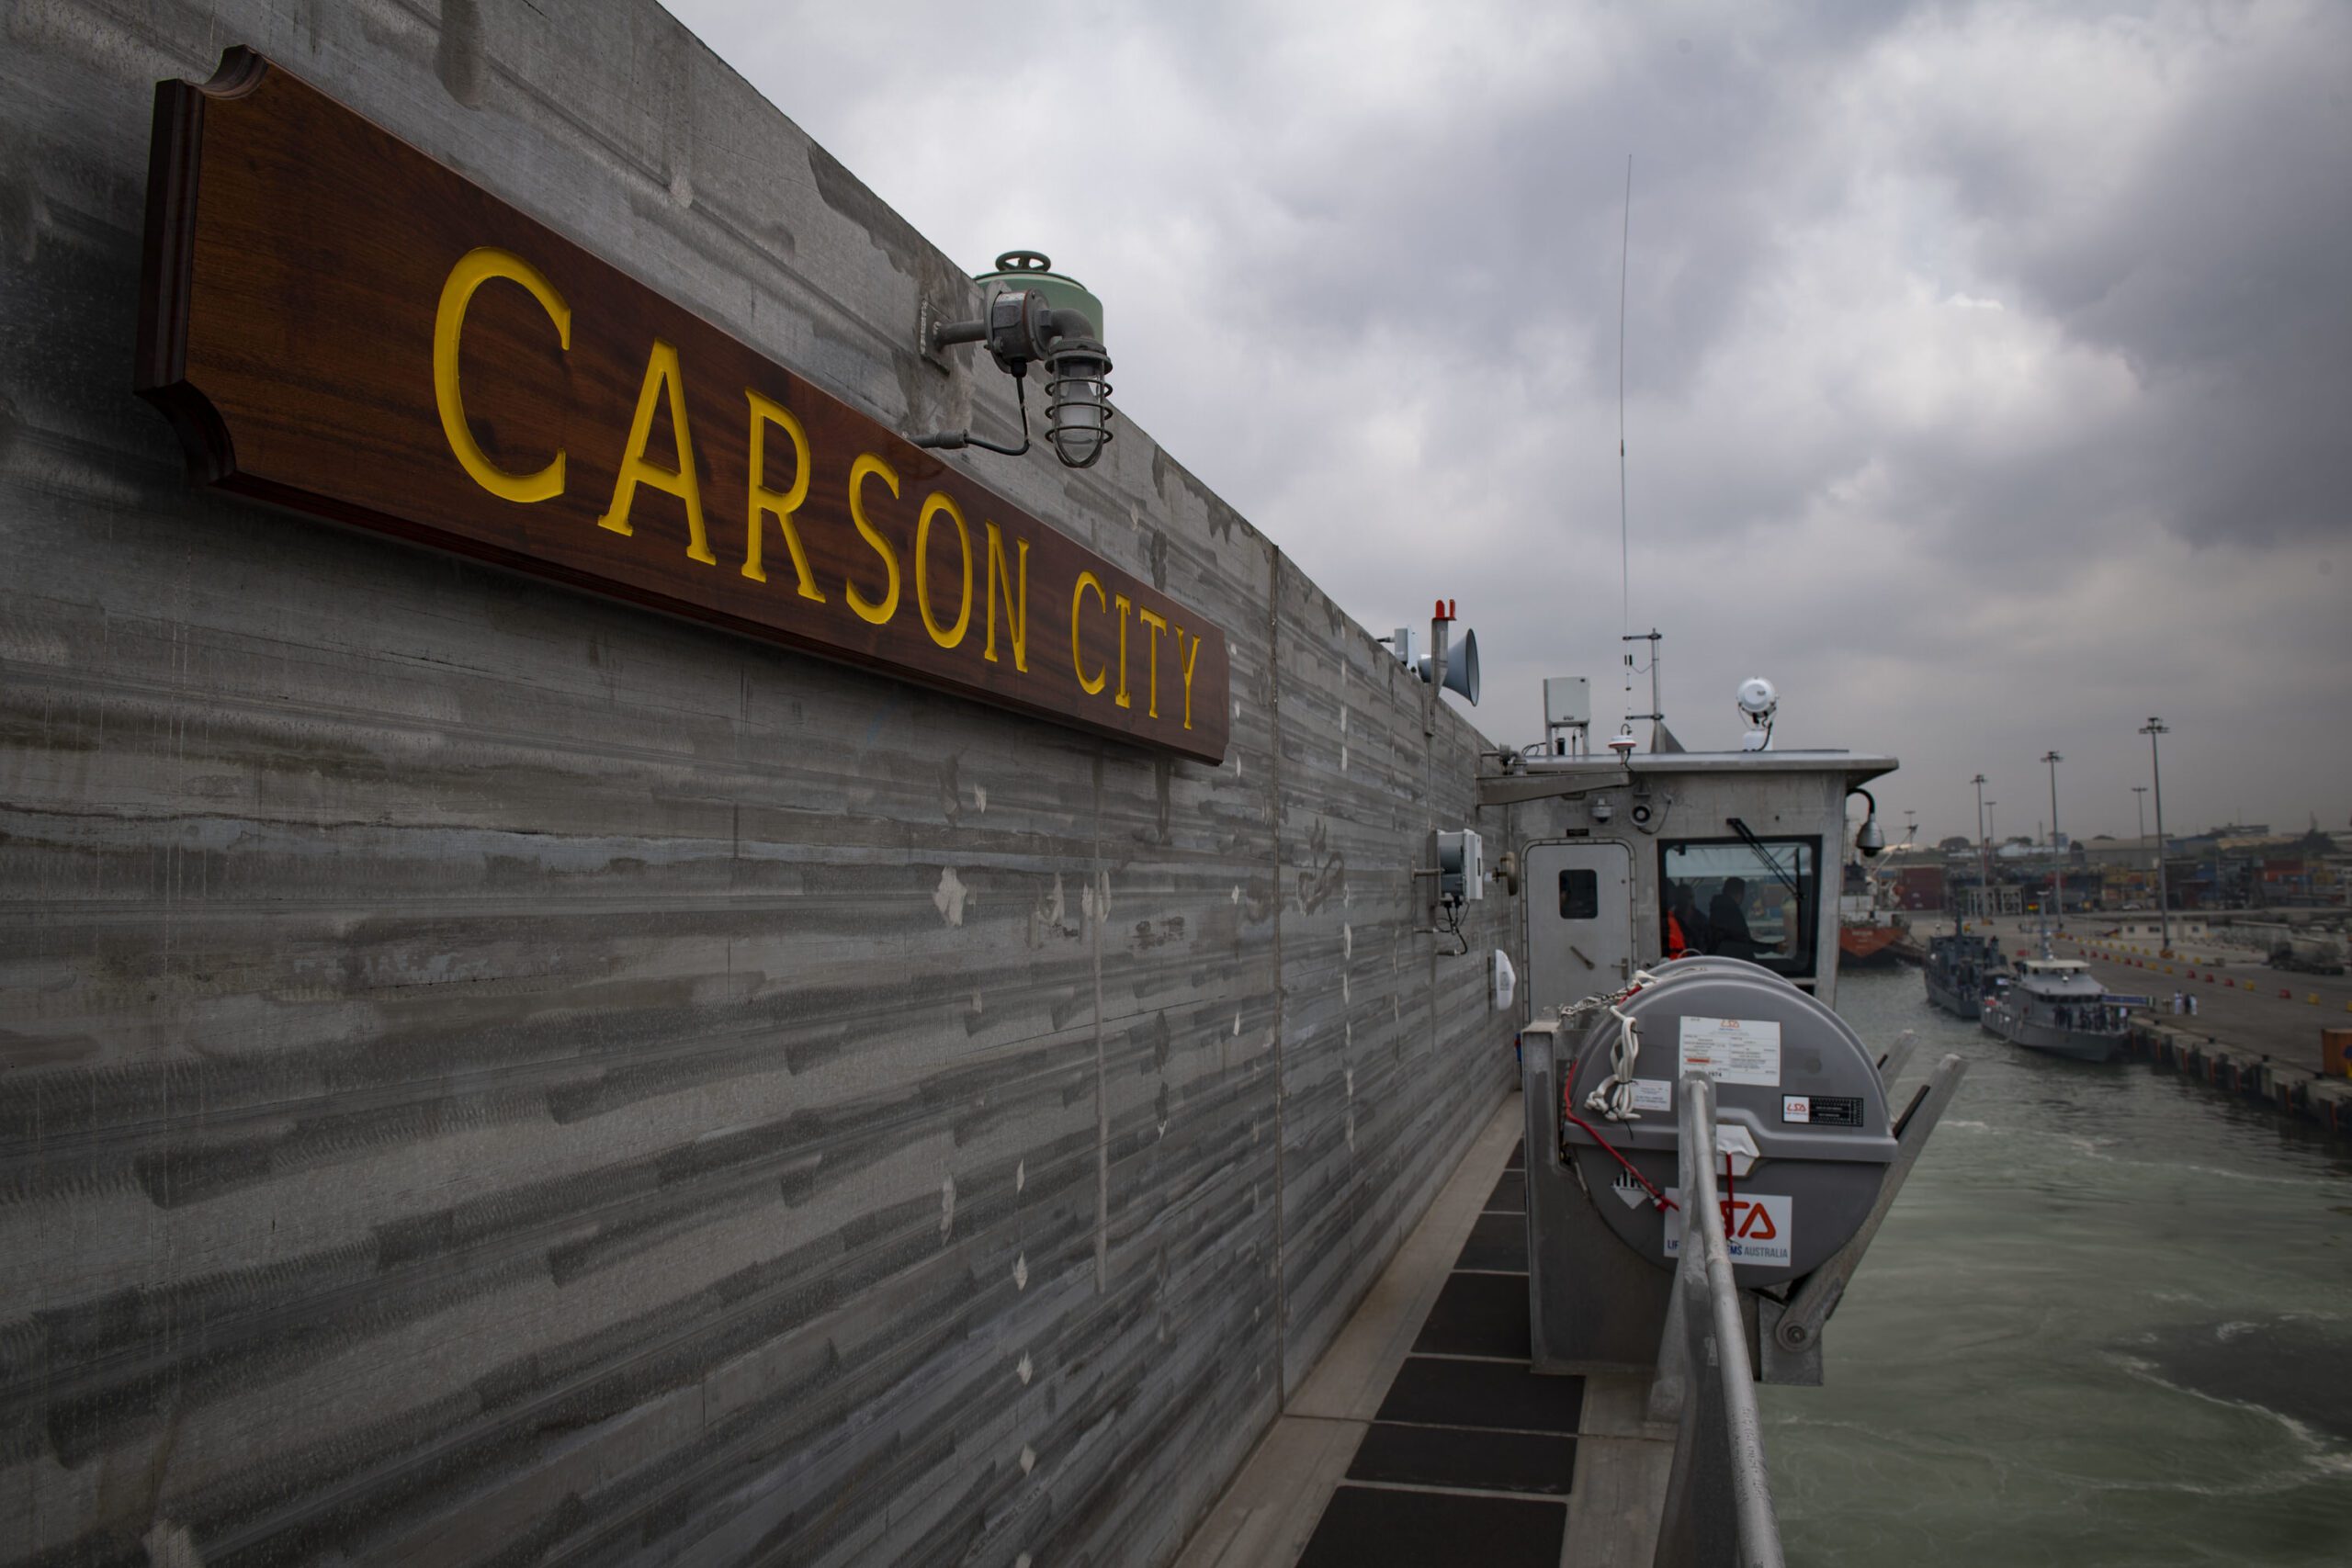 US Naval Ship Carson City docked during a storm